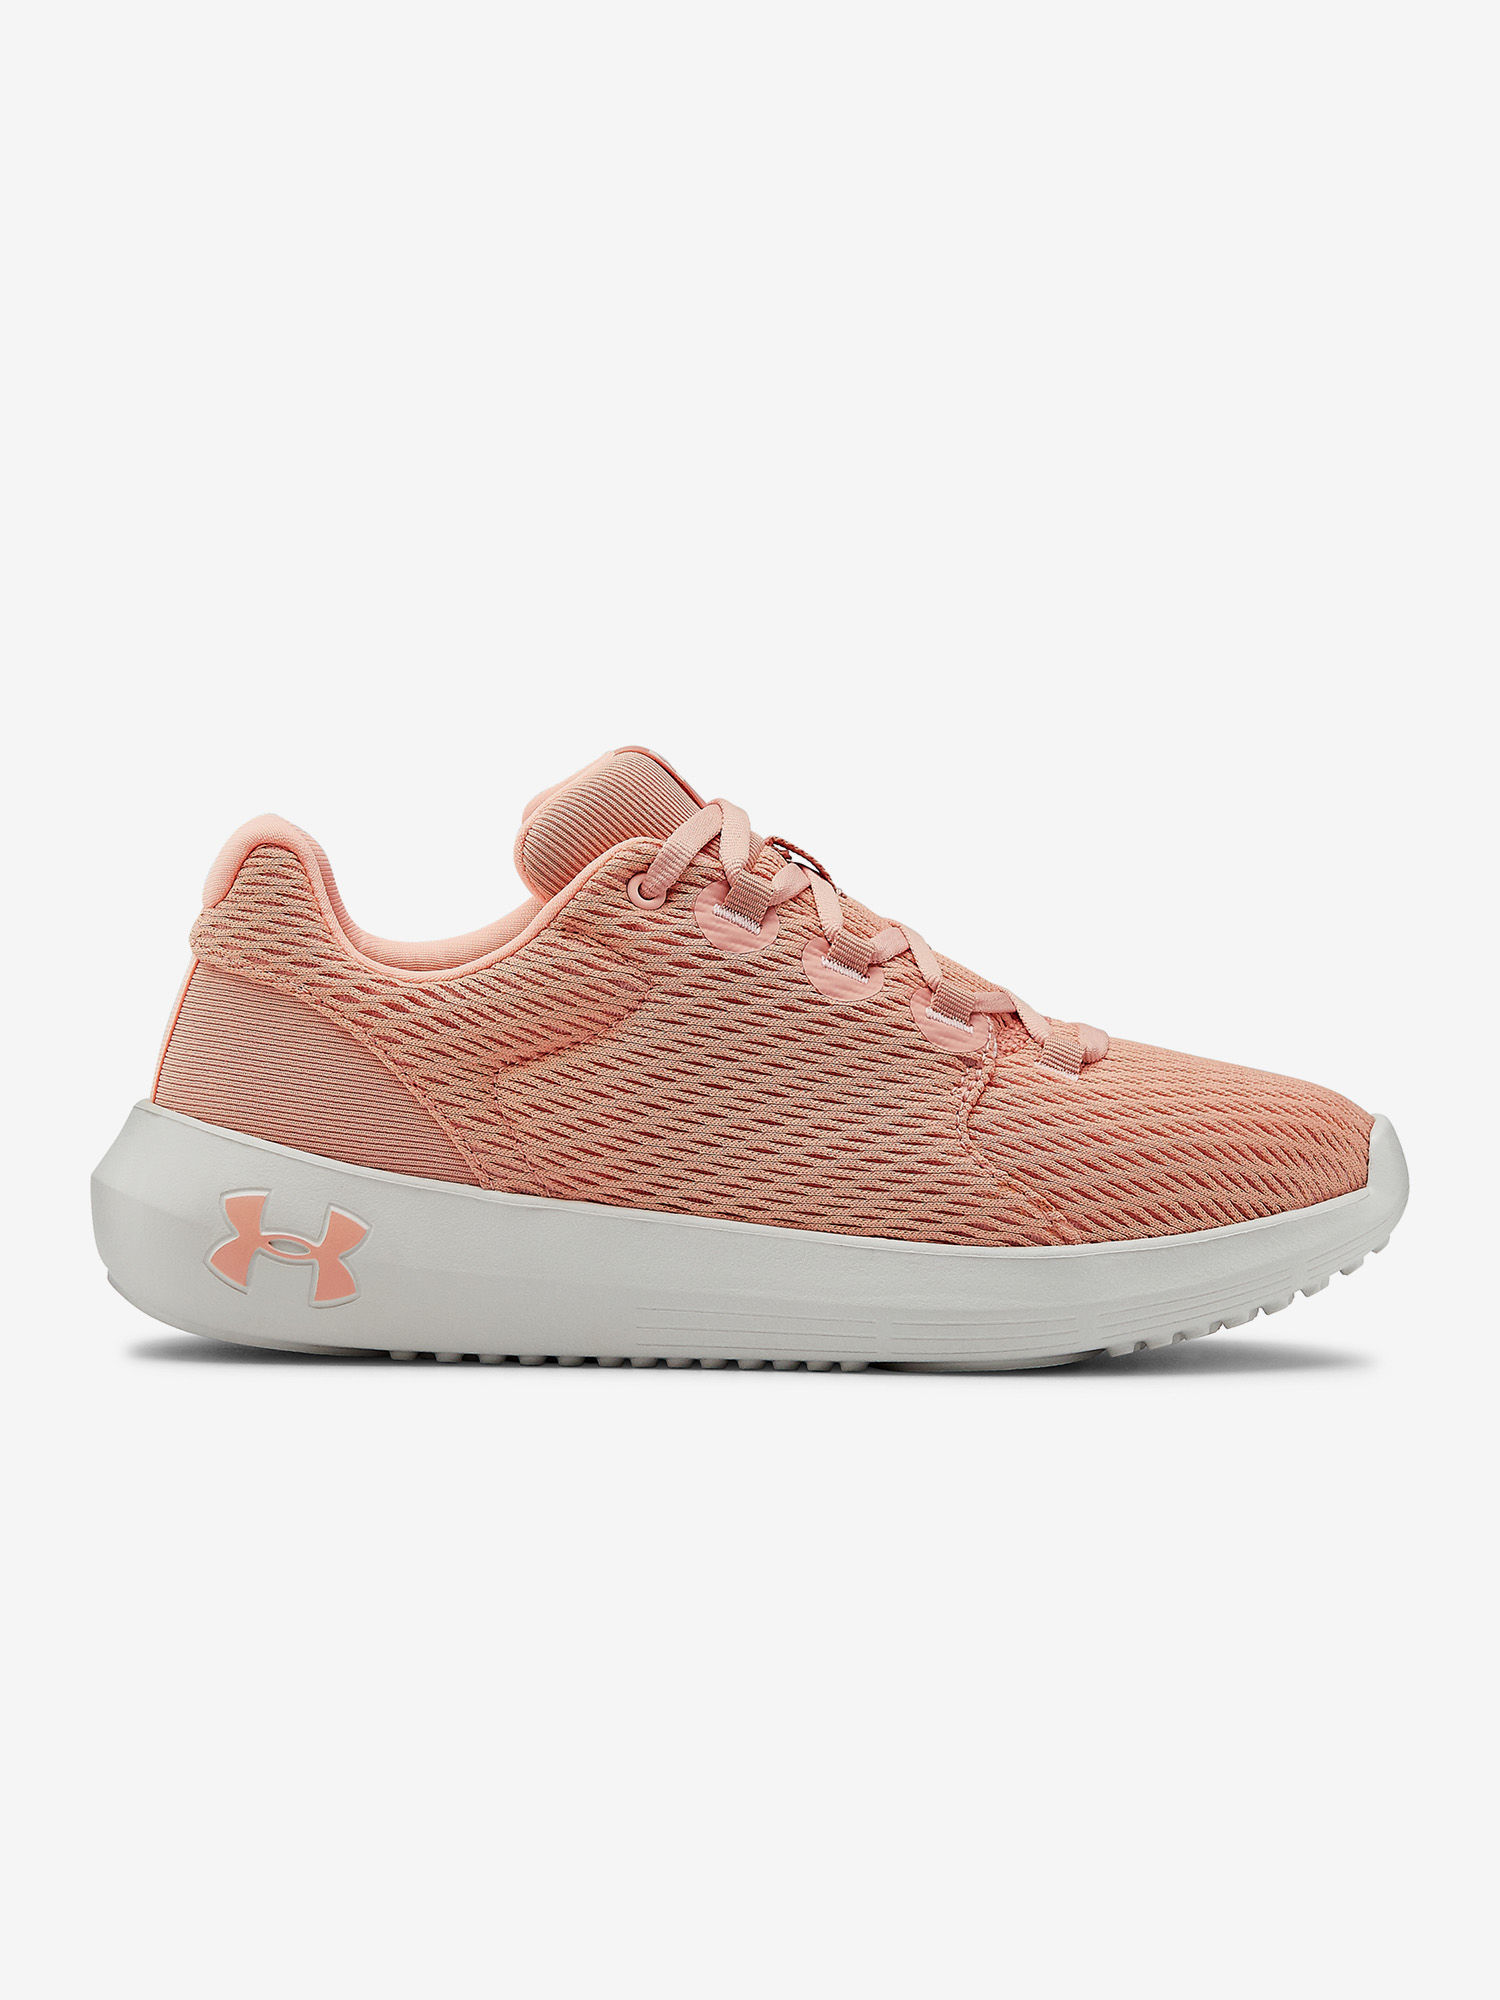 Topánky Under Armour W Ripple 2.0 Nm1 (1)